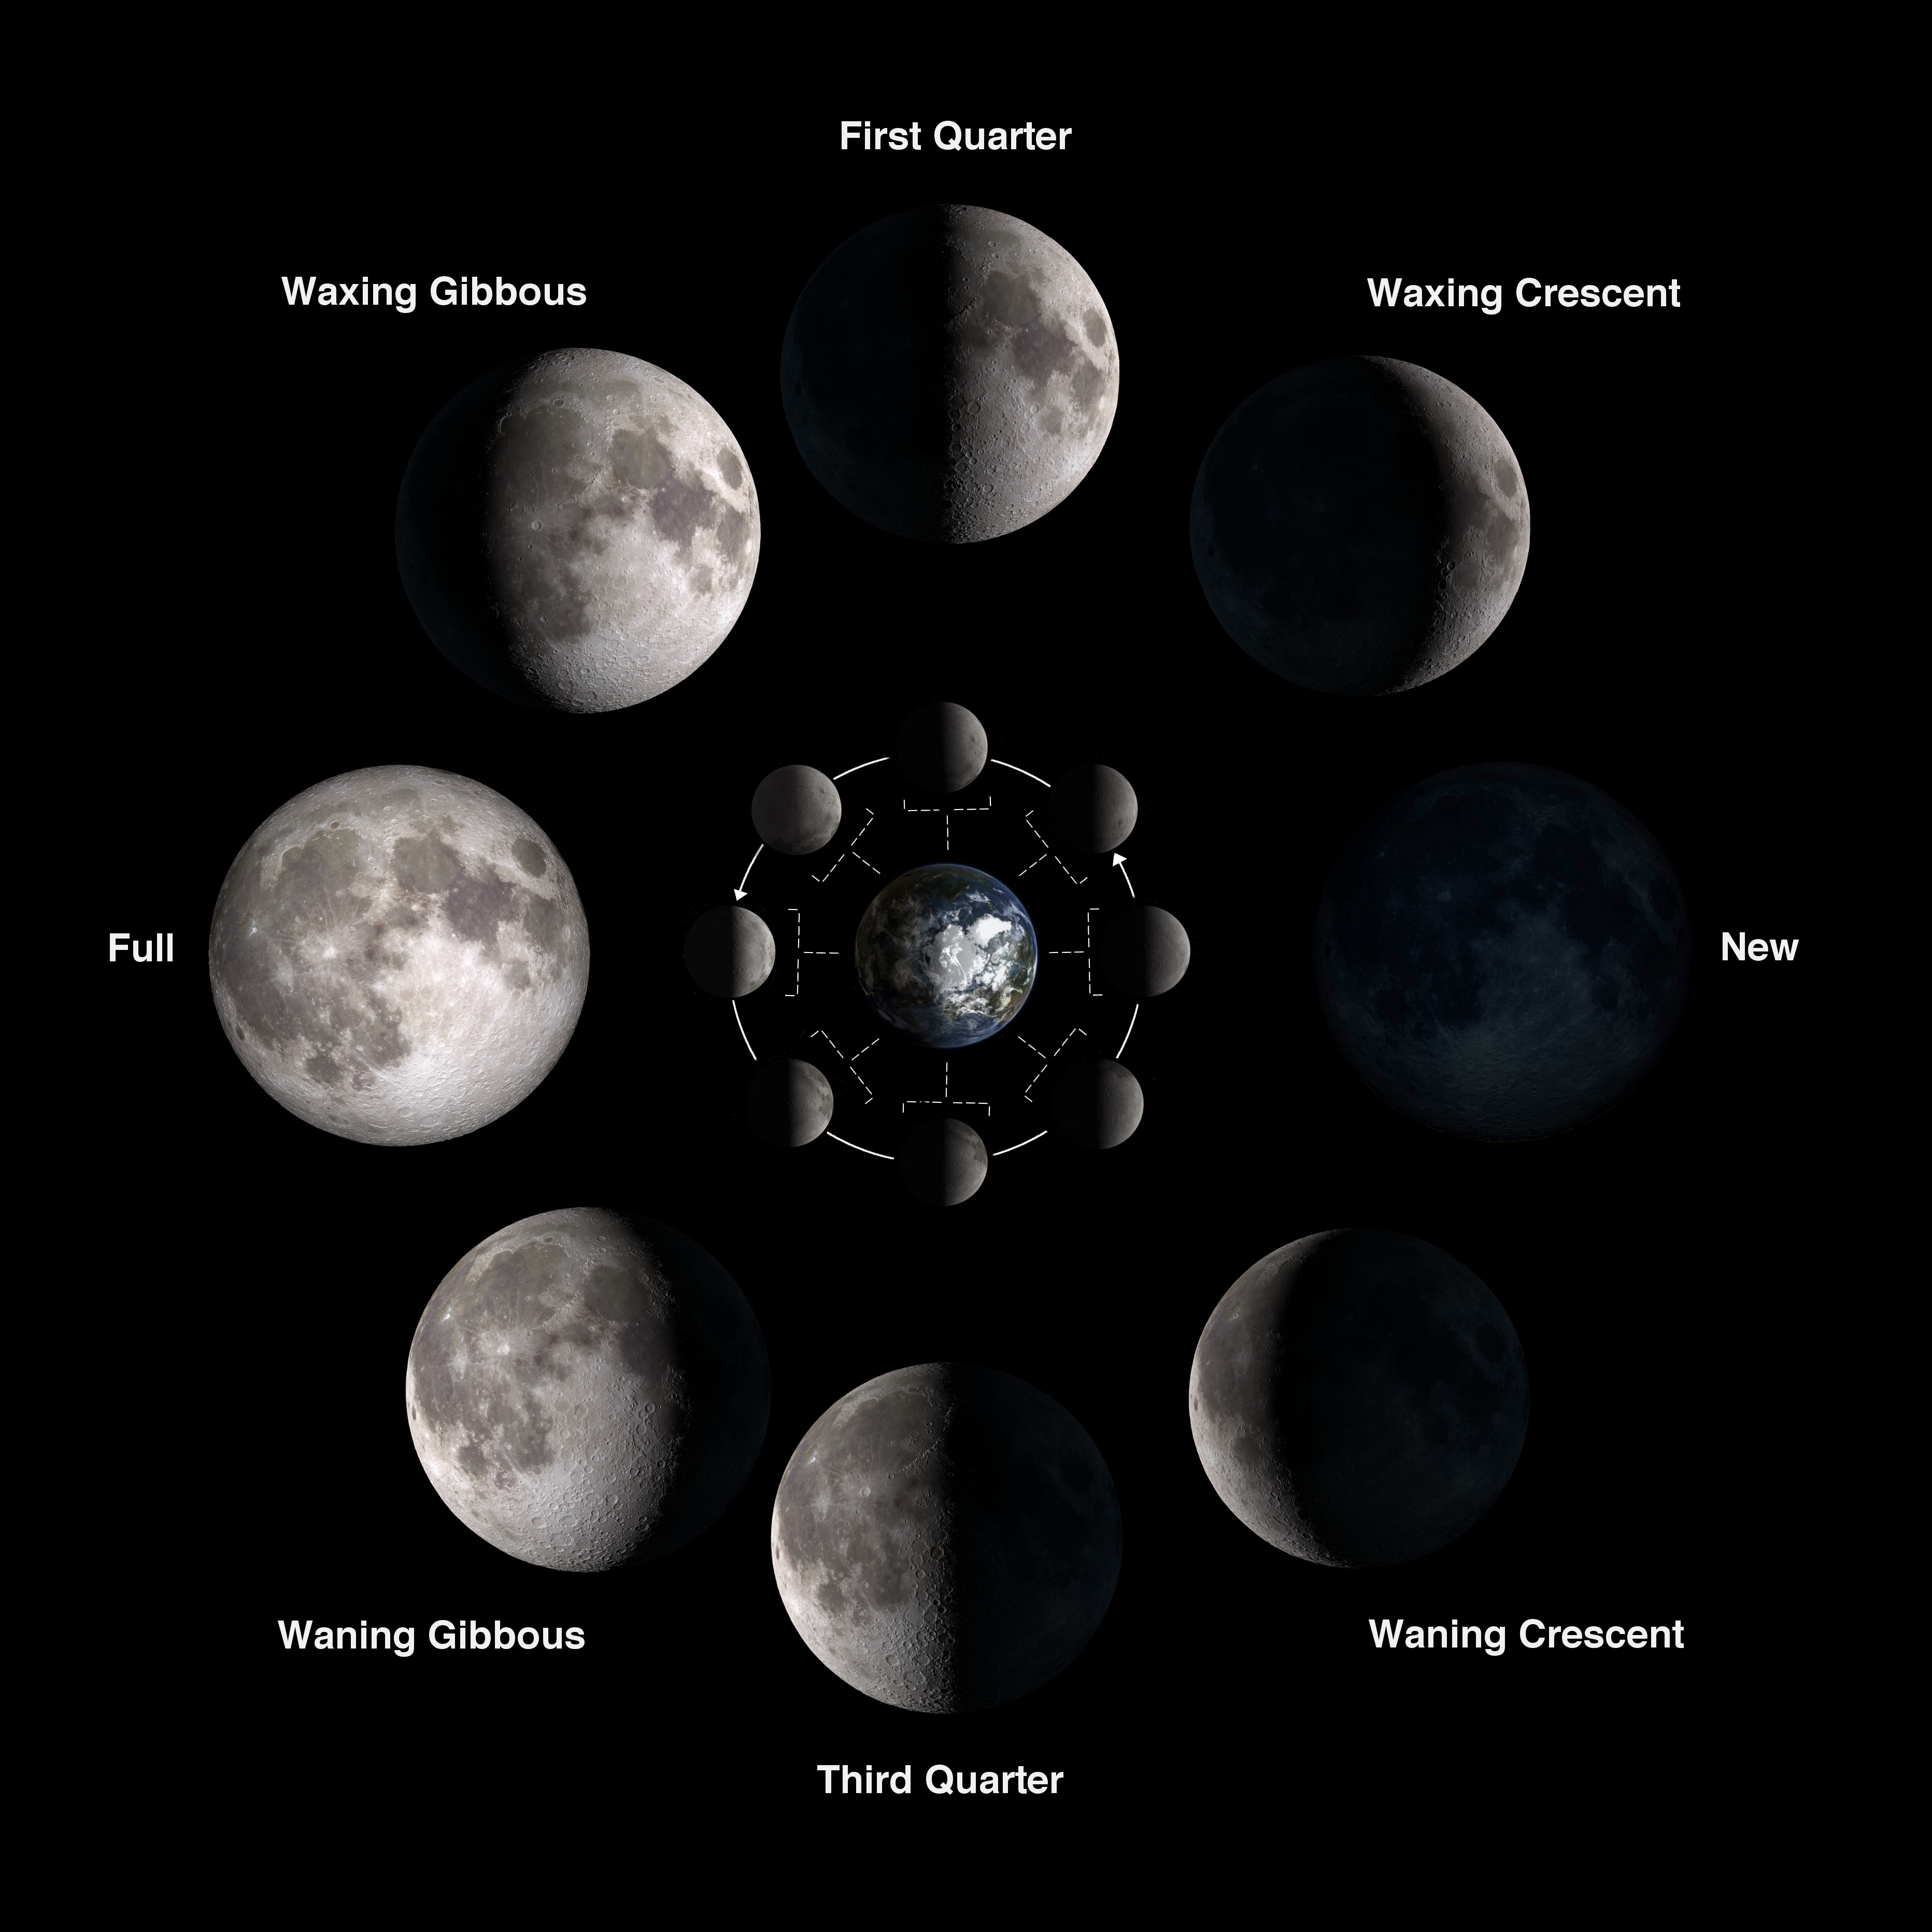 Solar System Exploration Multimedia Gallery Phases of the Moon